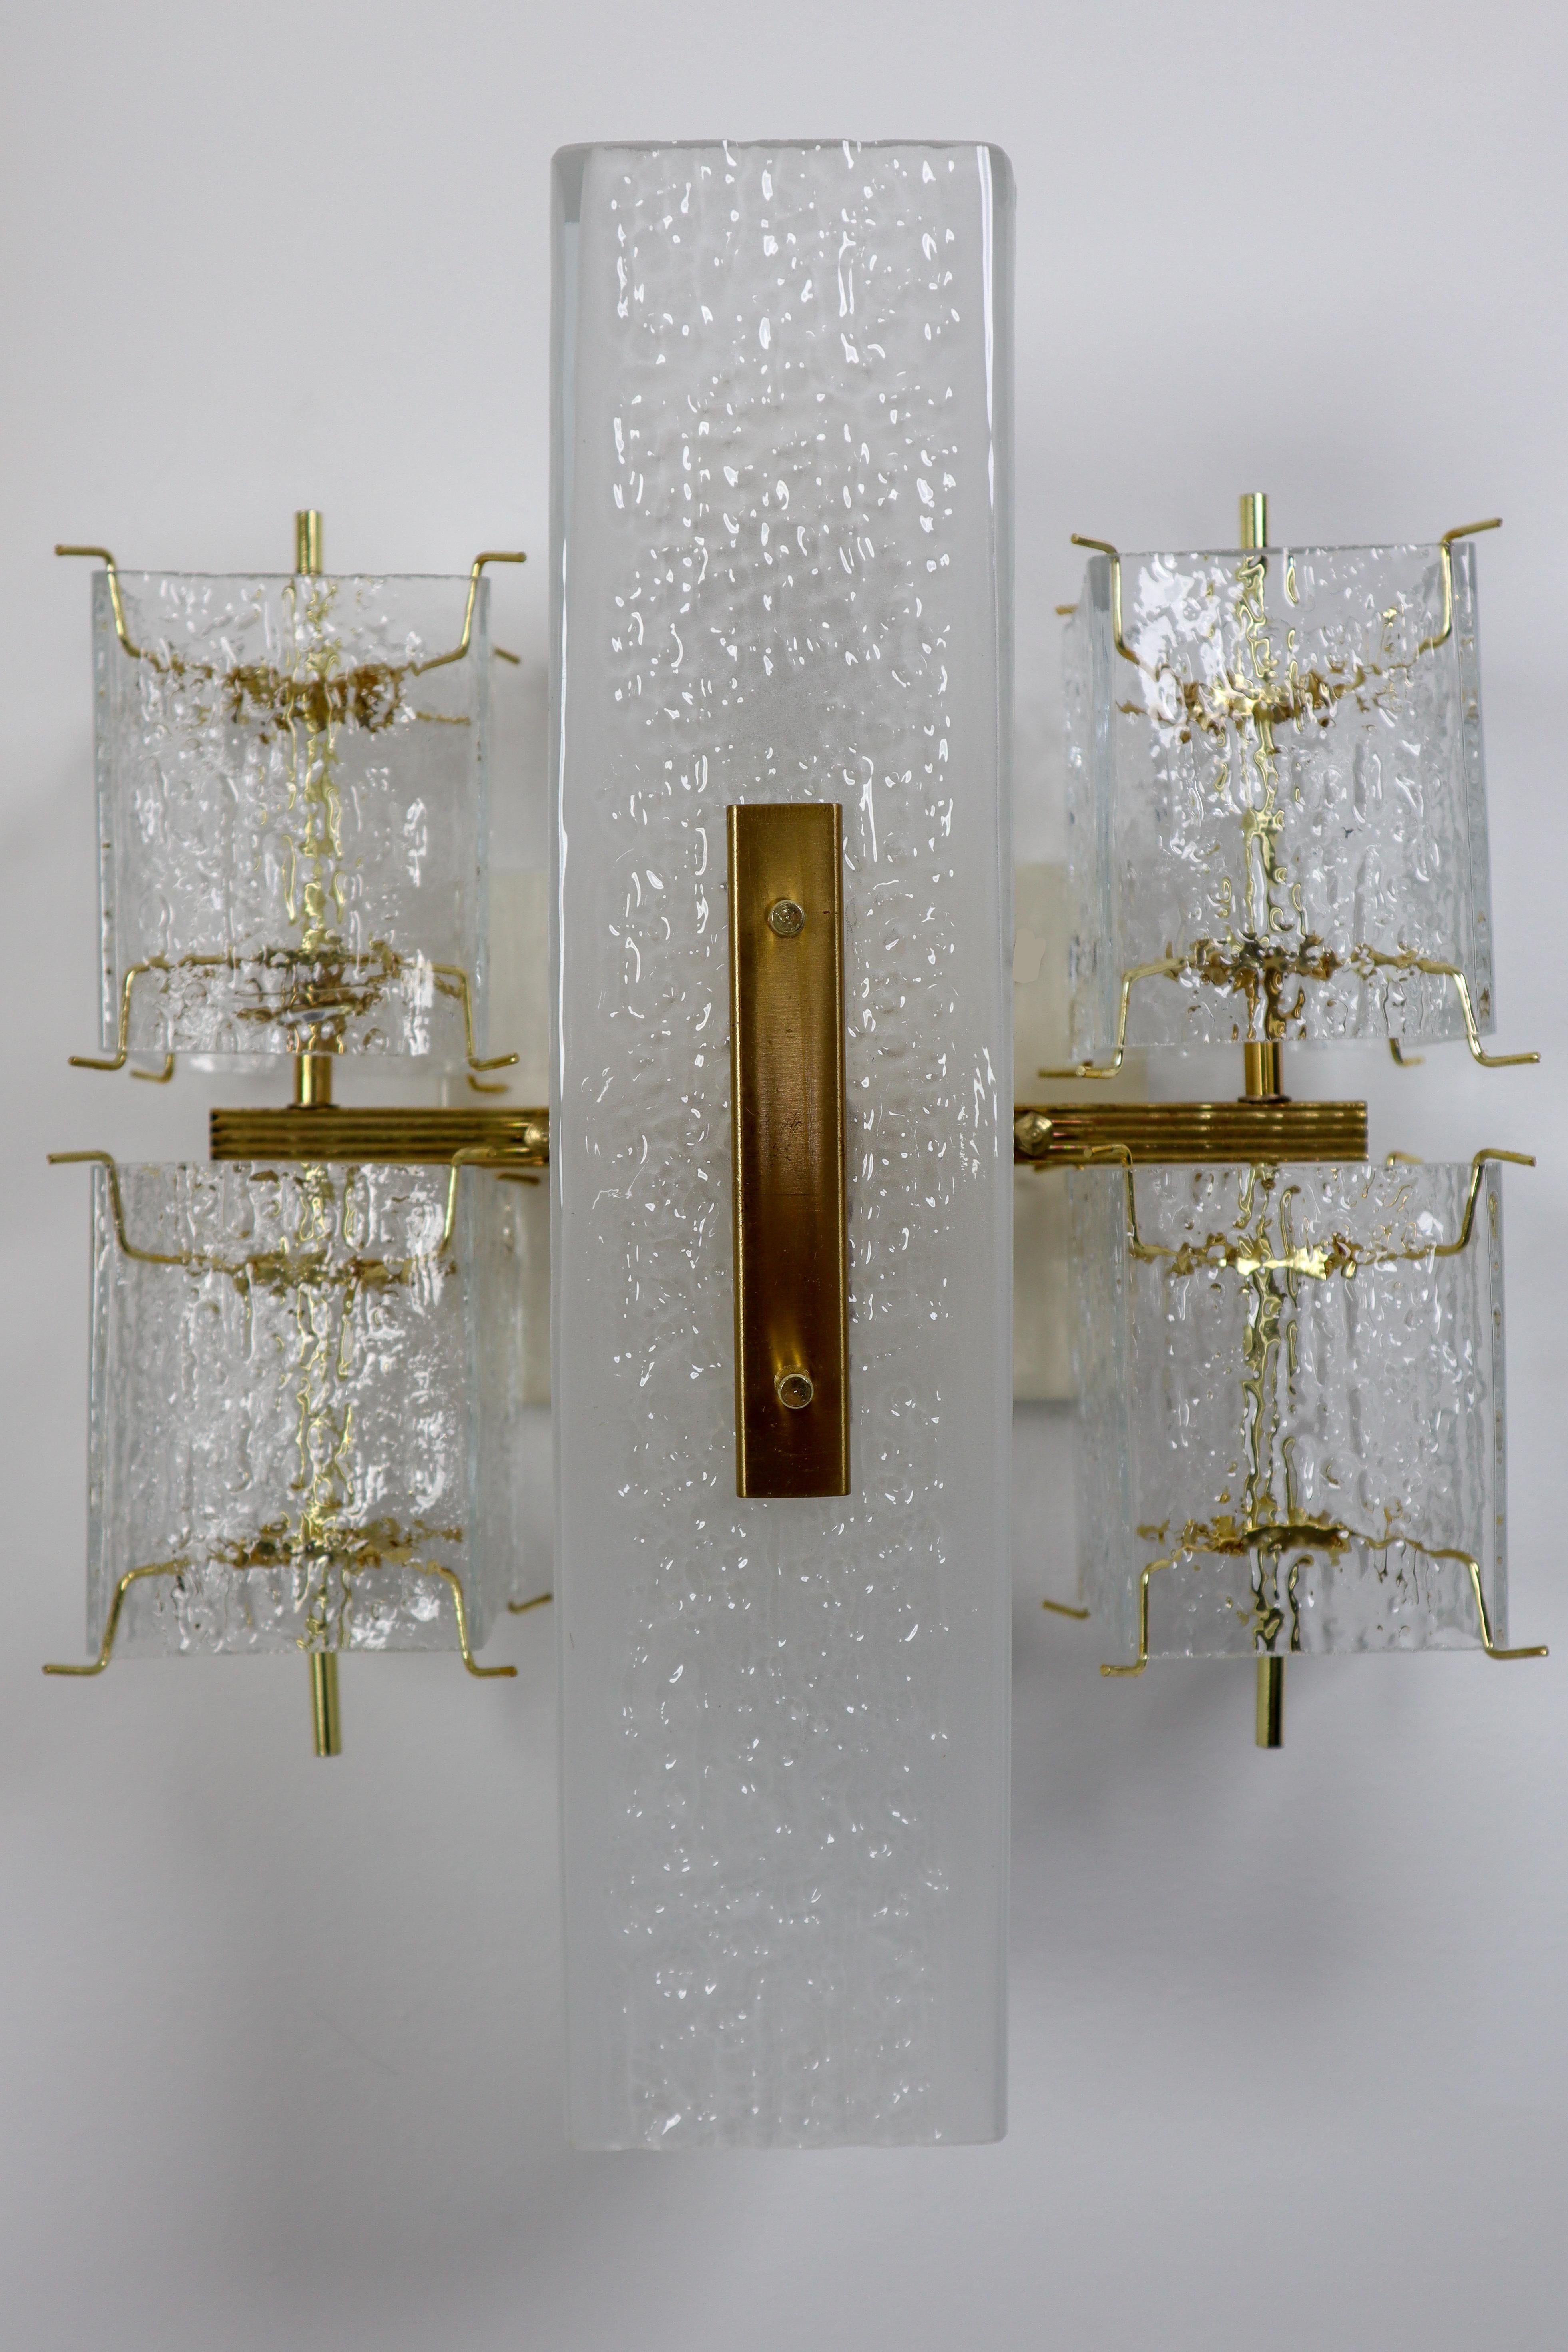 European 1 of 8 Midcentury Wall Lights with Structured Glass and Brass, Europe, 1970s For Sale